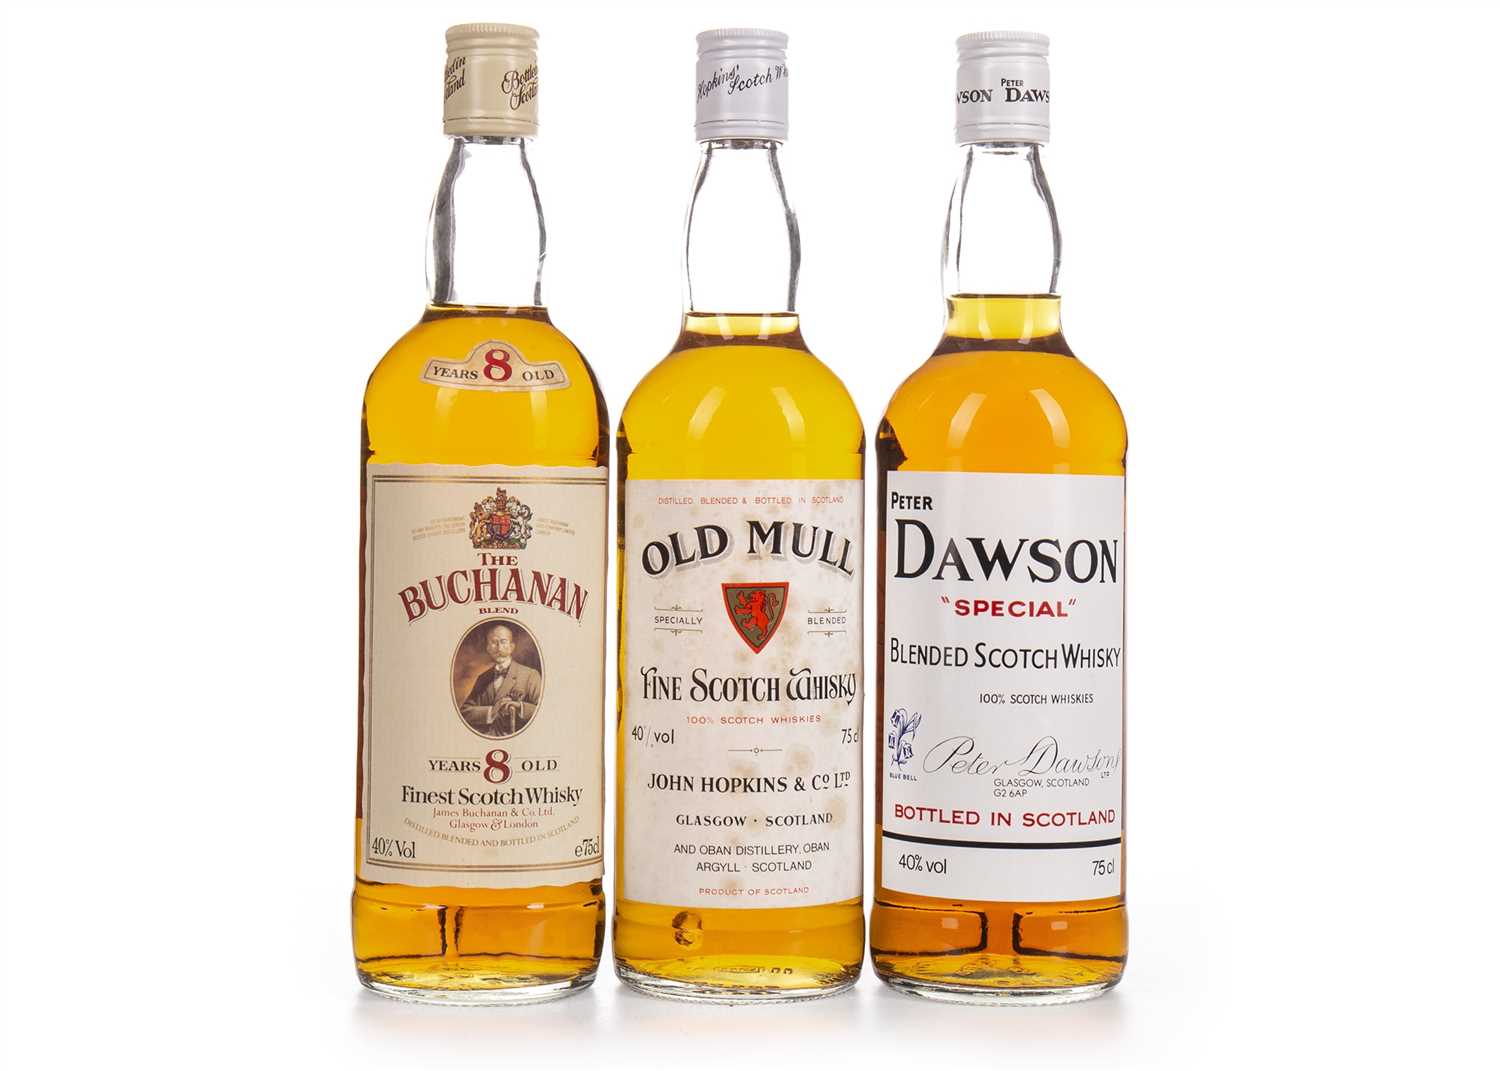 Lot 433 - OLD MULL, PETER DAWSON SPECIAL AND THE BUCHANAN BLEND